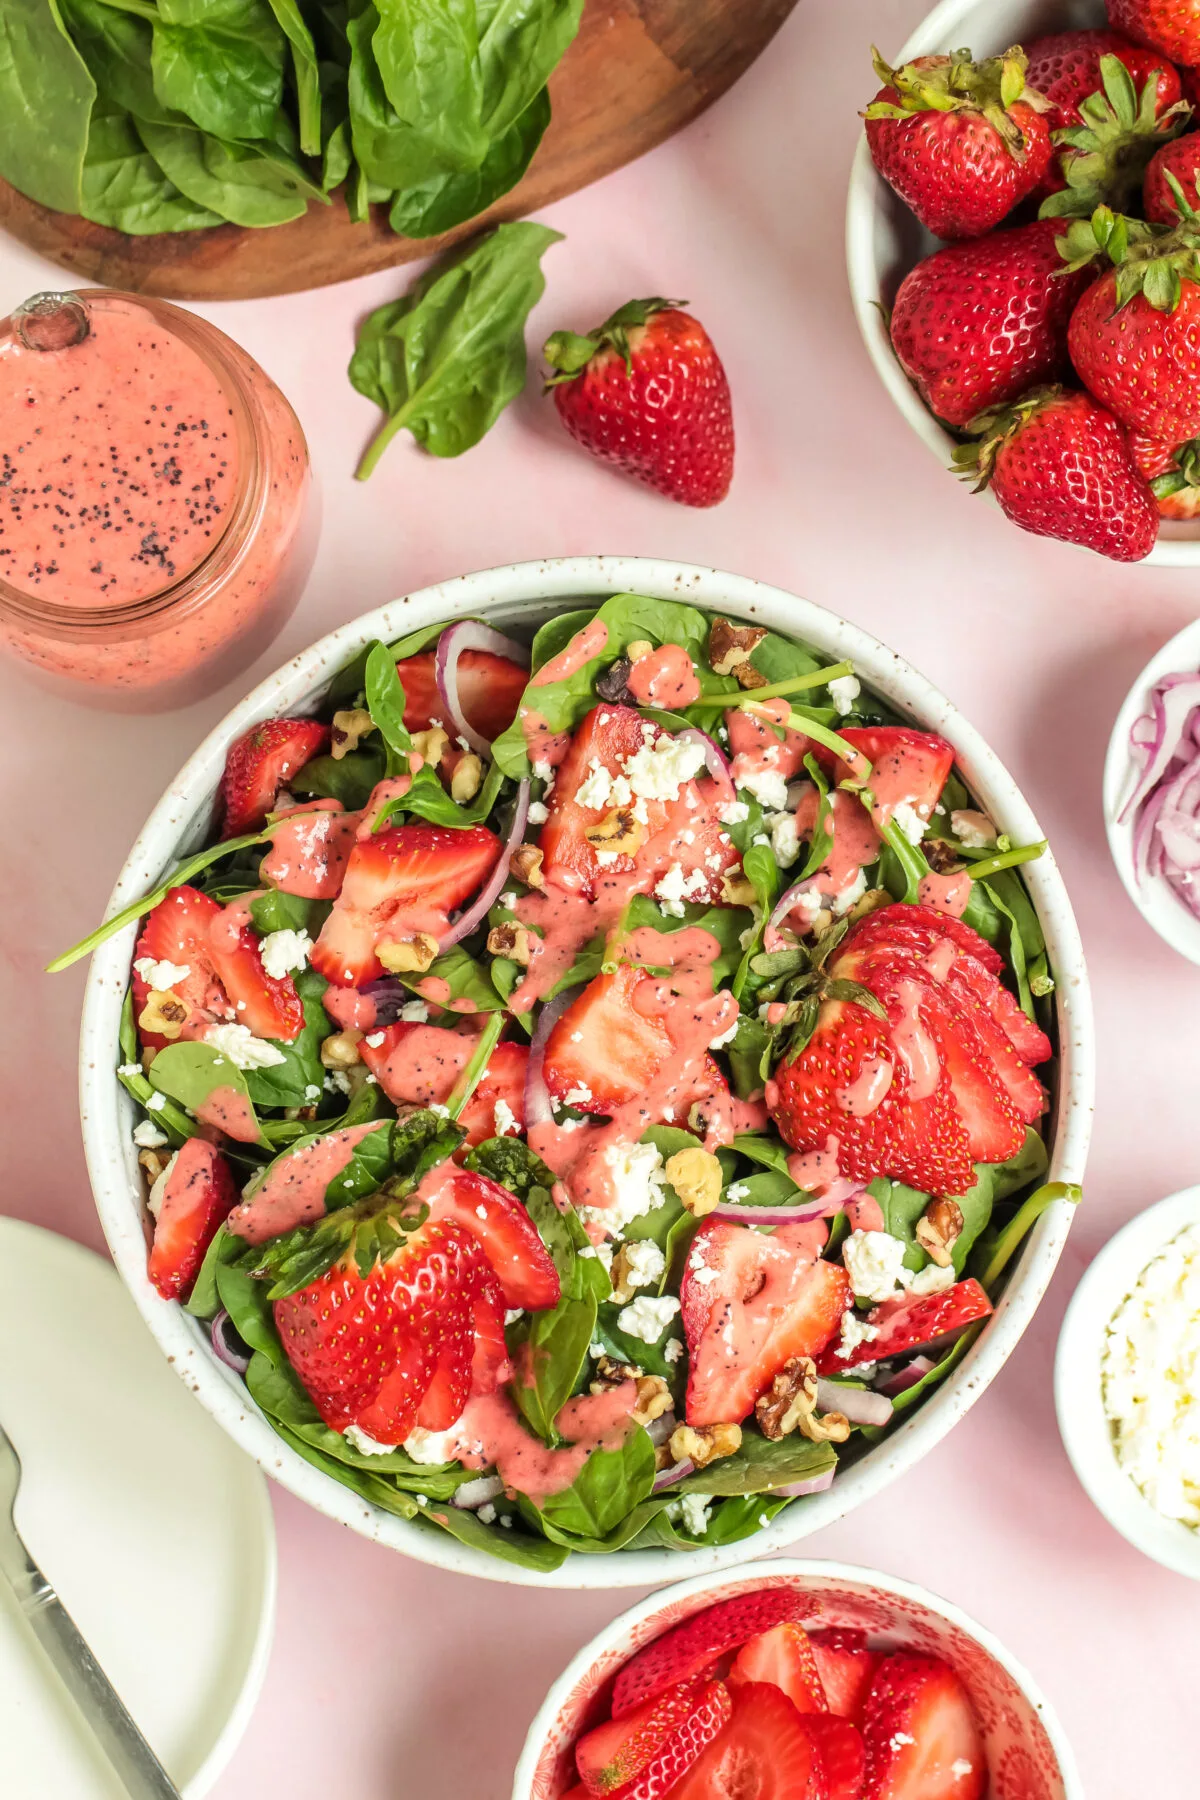 A summer salad recipe perfect for any occasion, this strawberry spinach salad is easy to make and features a strawberry poppy seed dressing.